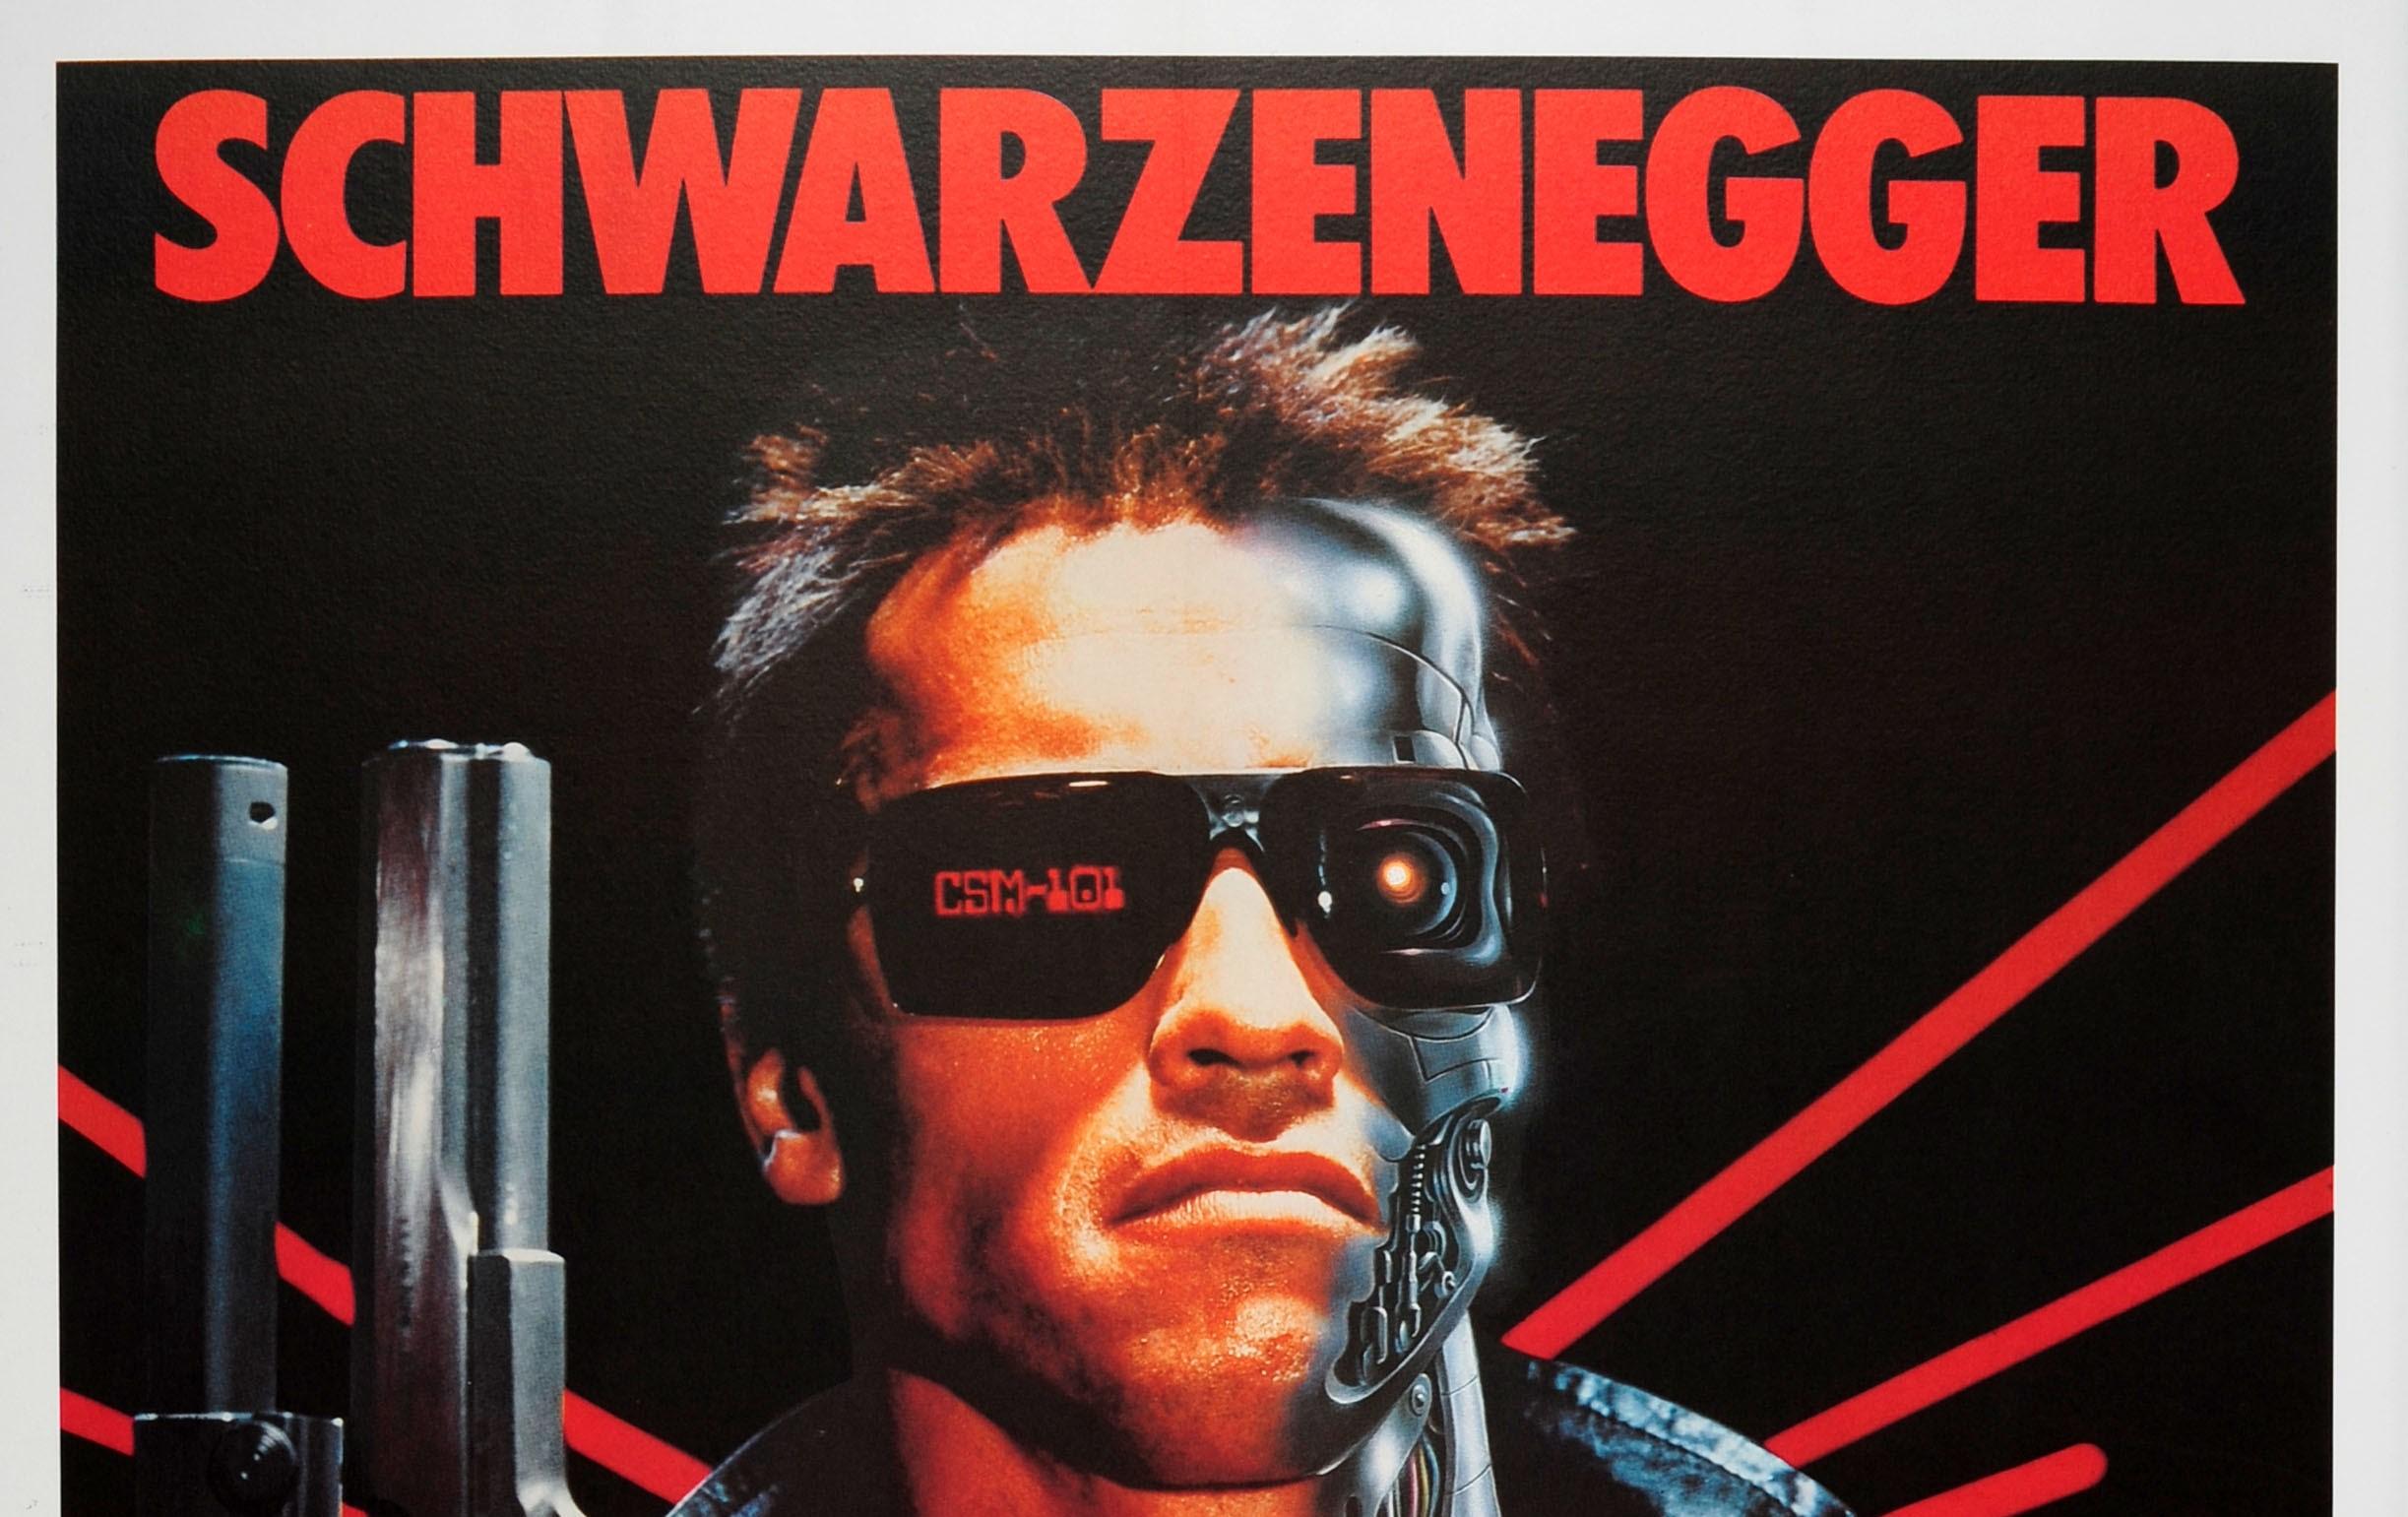 Original vintage movie poster for the Italian release in 1985 of the 1984 American science fiction film directed by James Cameron - The Terminator - starring Arnold Schwarzenegger in the lead role, Michael Biehn, Linda Hamilton as Sarah Connor, and